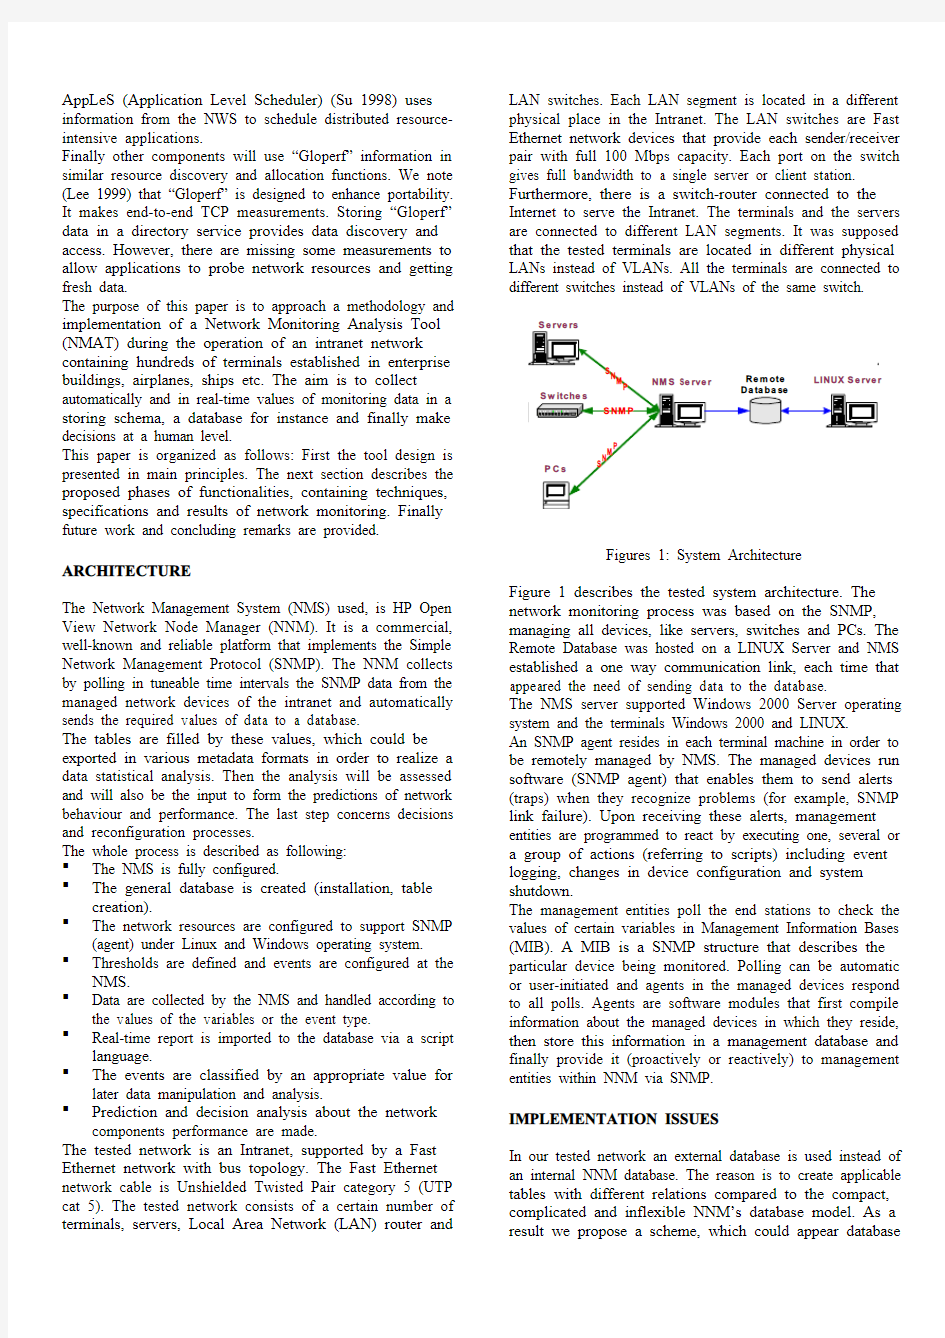 An approach to a methodology and implementation of a Network Monitoring Analysis Tool